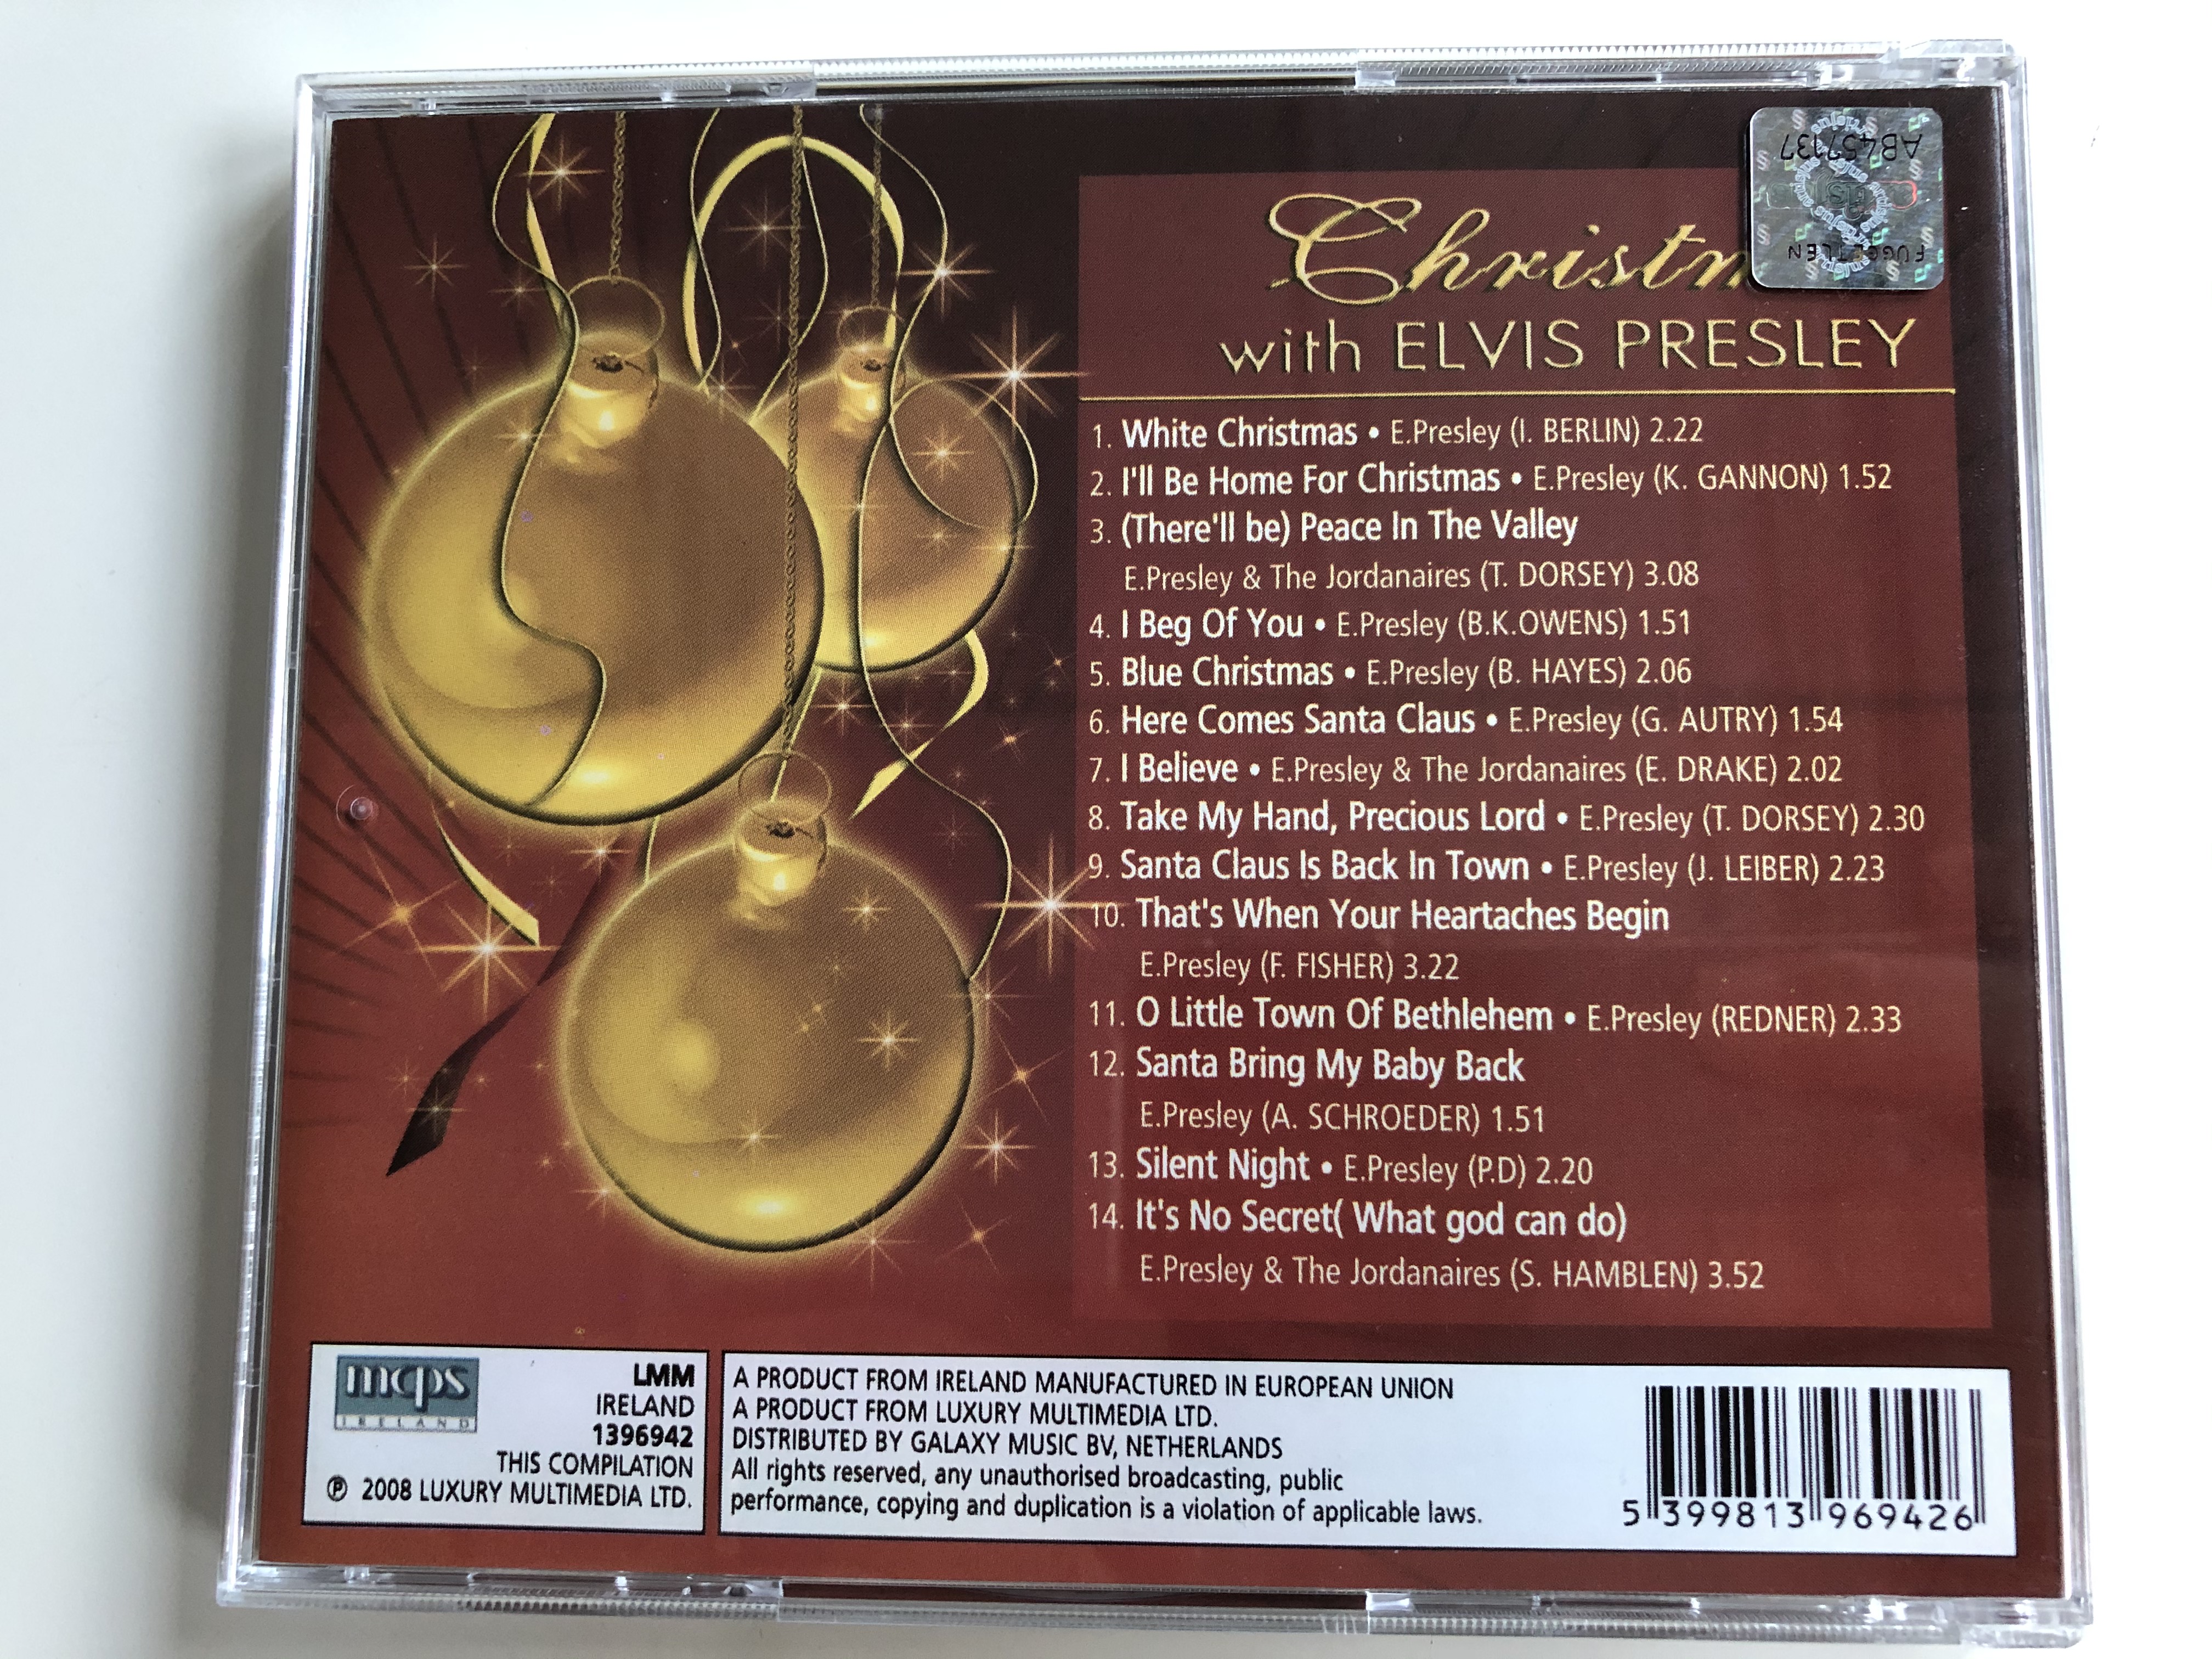 christmas-with-elvis-presley-white-christmas-santa-claus-is-back-in-town-silent-night-lmm-audio-cd-2008-1396942-4-.jpg